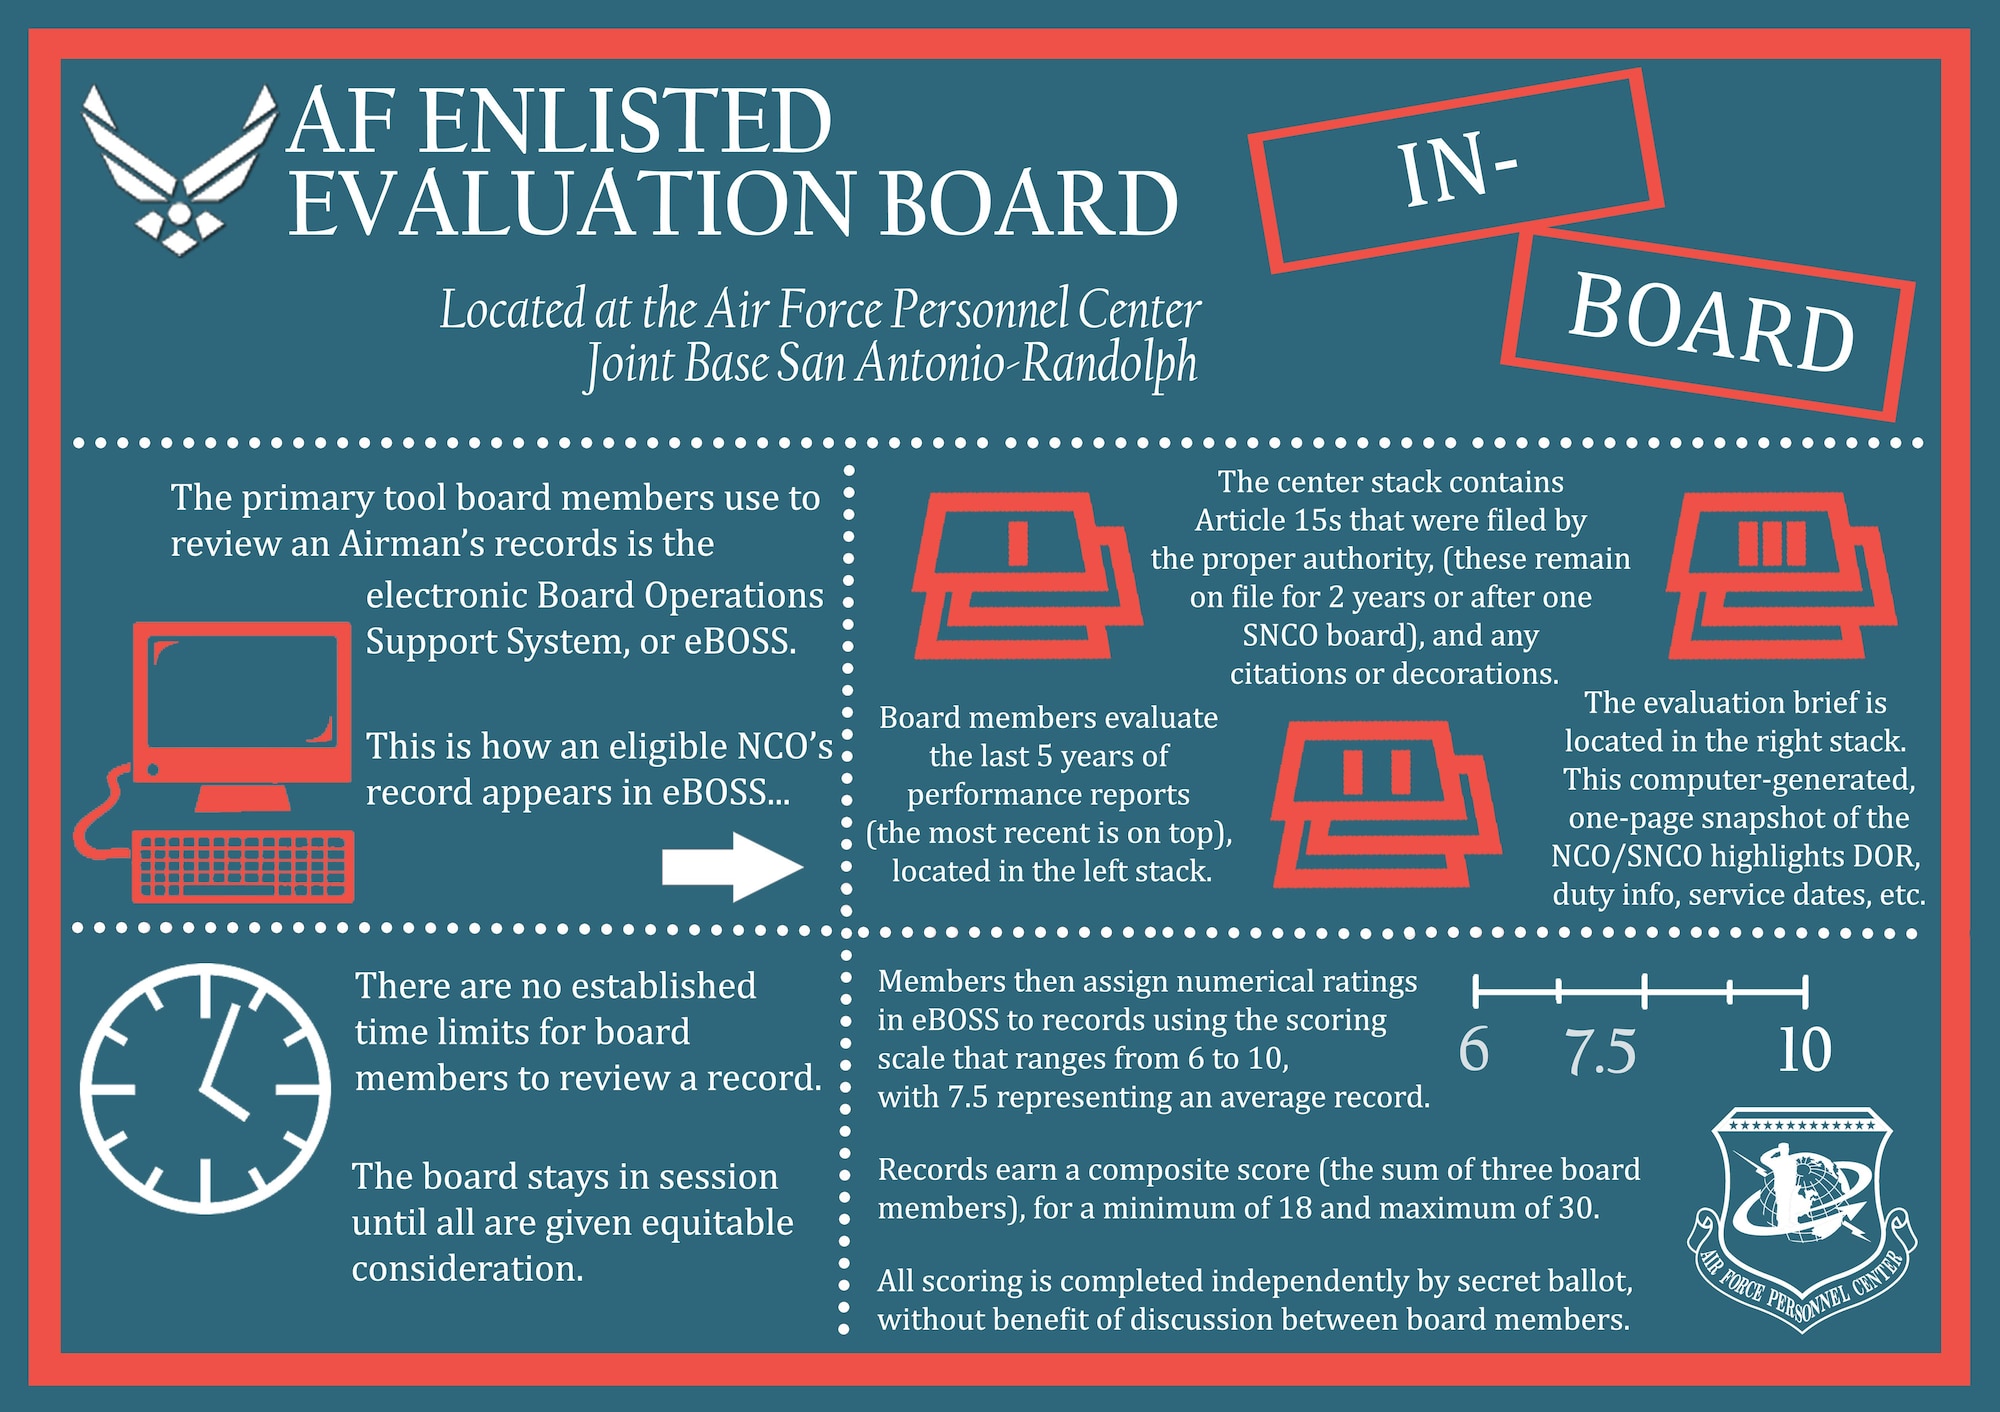 In-board information surrounding the Air Force Enlisted Evaluation Board process. Airmen should direct all other questions to the Total Force Service Center at 1-800-525-0102, or via email at AFPC.PB@us.af.mil. (U.S. Air Force infographic by Staff Sgt. Alexx Pons)